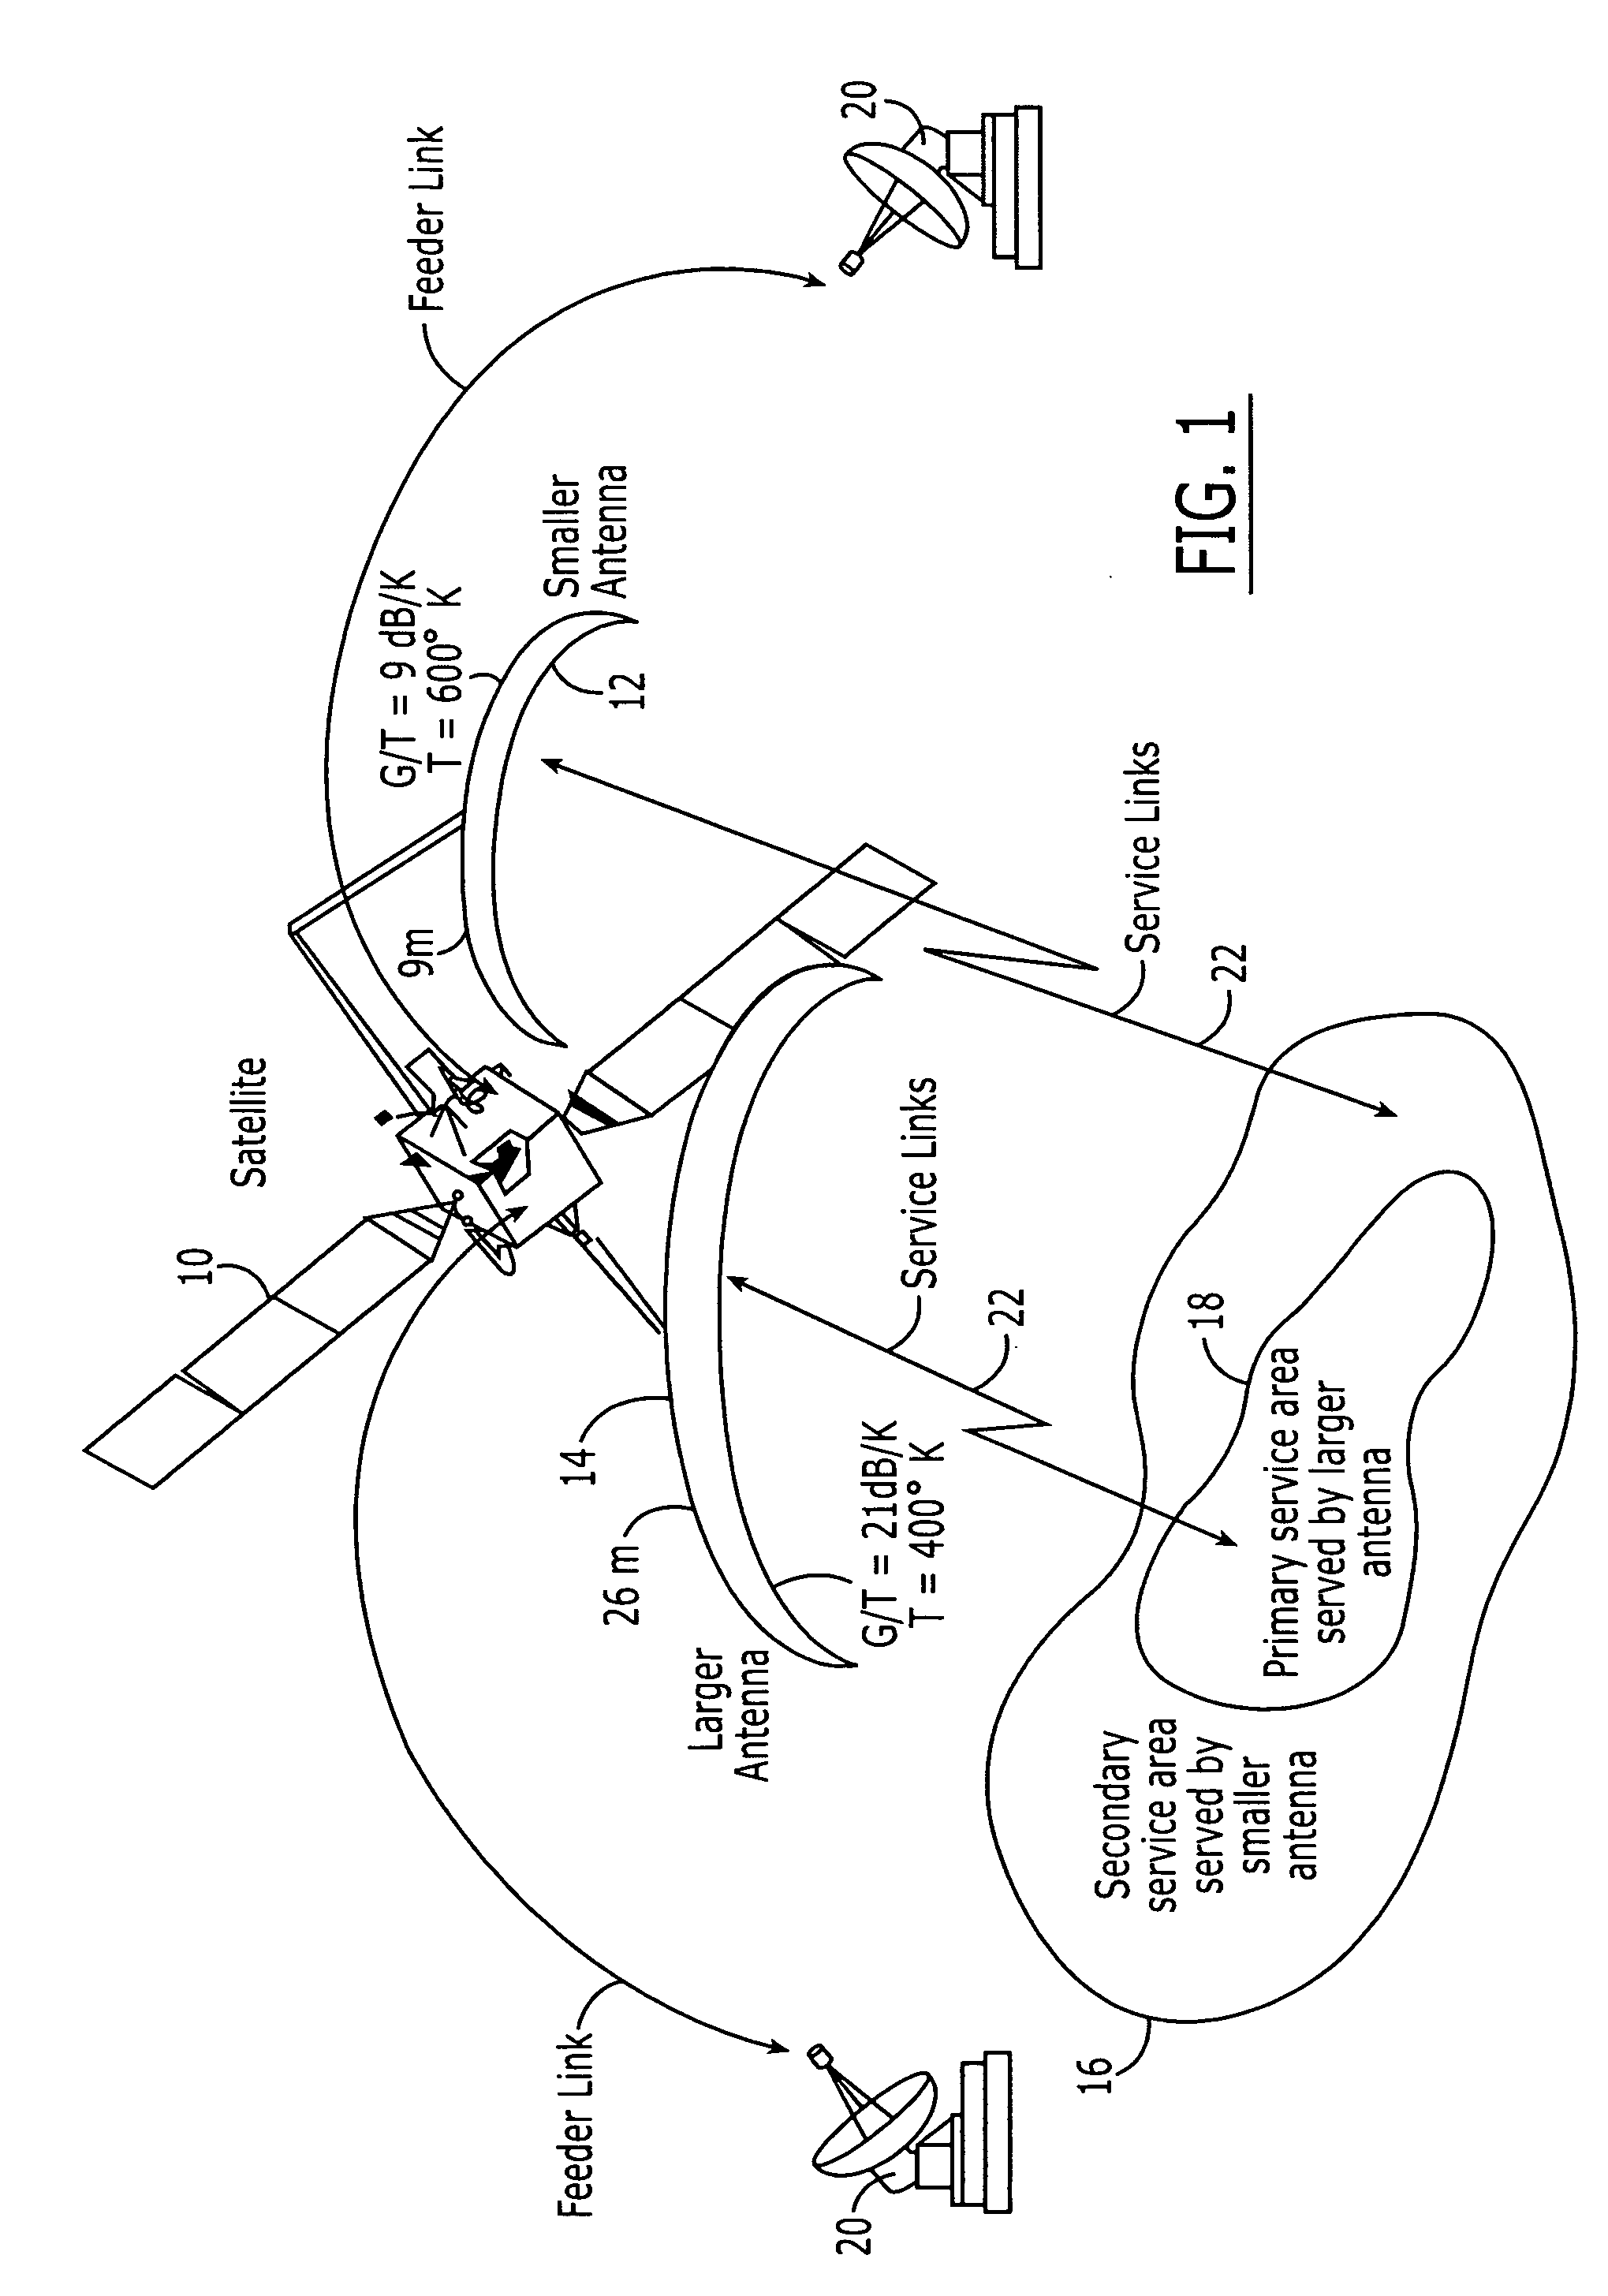 Satellite with different size service link antennas and radioterminal communication methods using same